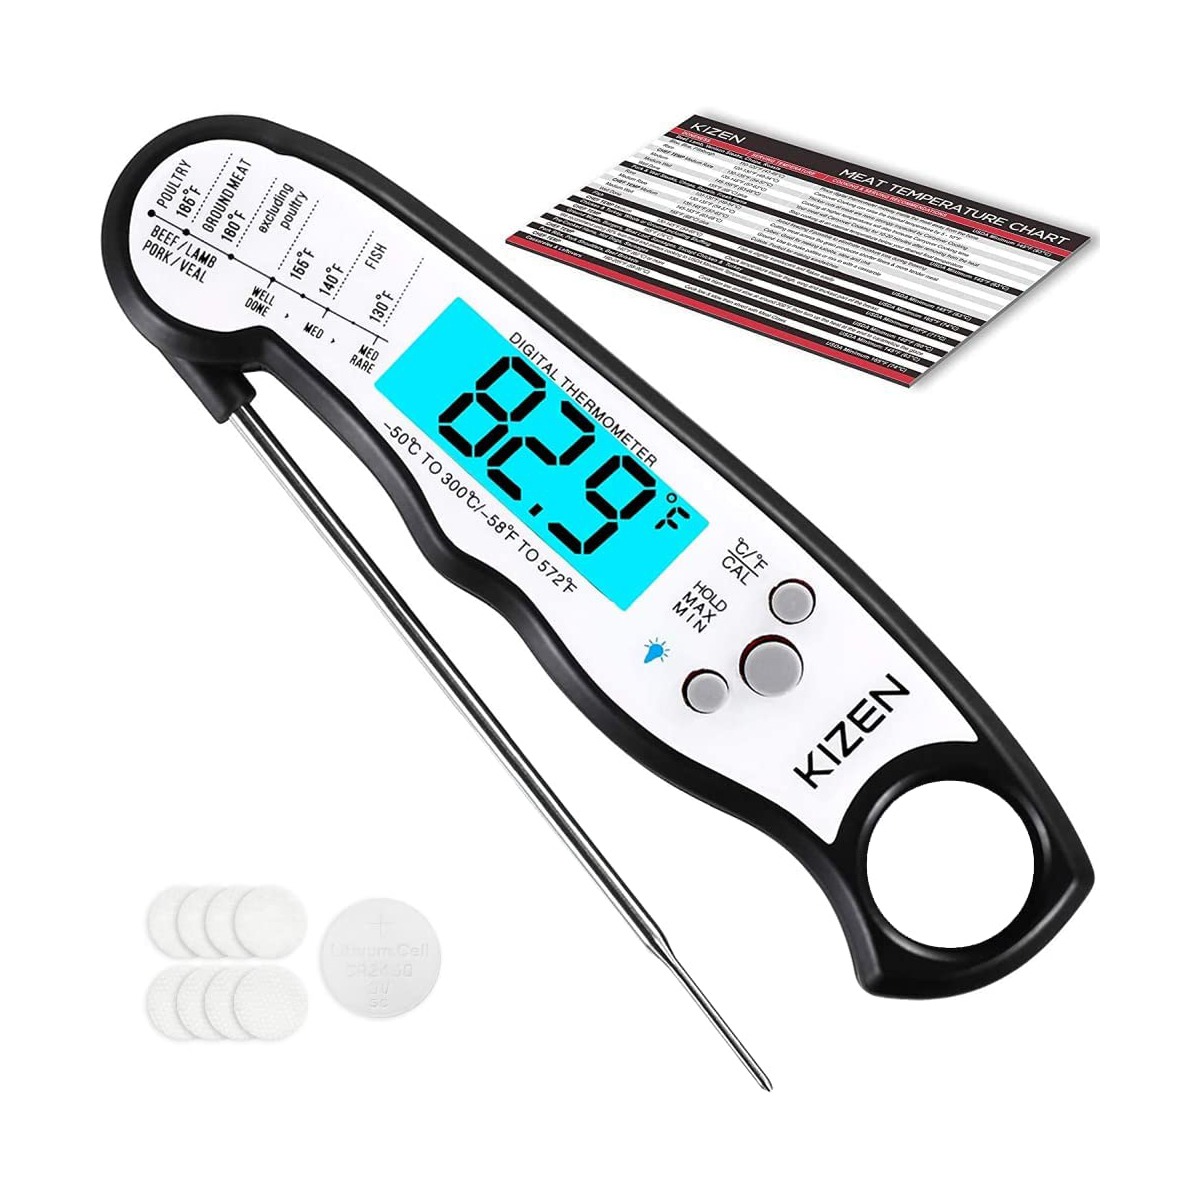 https://akns-images.eonline.com/eol_images/Entire_Site/2022928/rs_1200x1200-221028090416-1200-meat-thermometer.jpg?fit=around%7C1200:1200&output-quality=90&crop=1200:1200;center,top